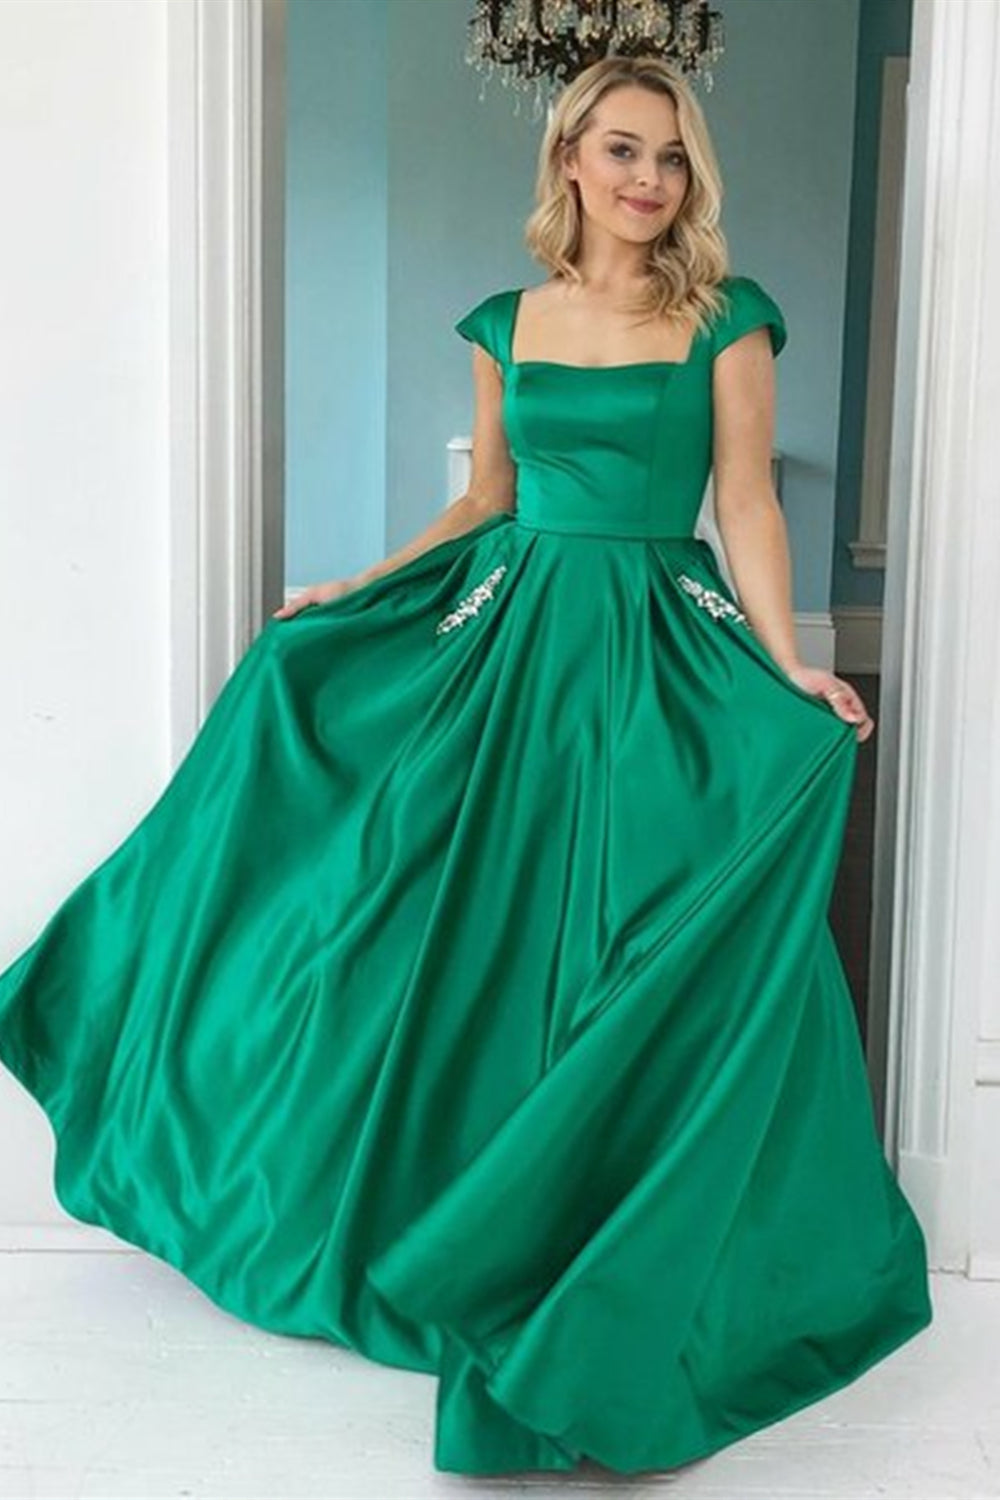 Cap Sleeves Green Satin Long Prom Dresses with Pocket, Green Formal Graduation Evening Dresses EP1453